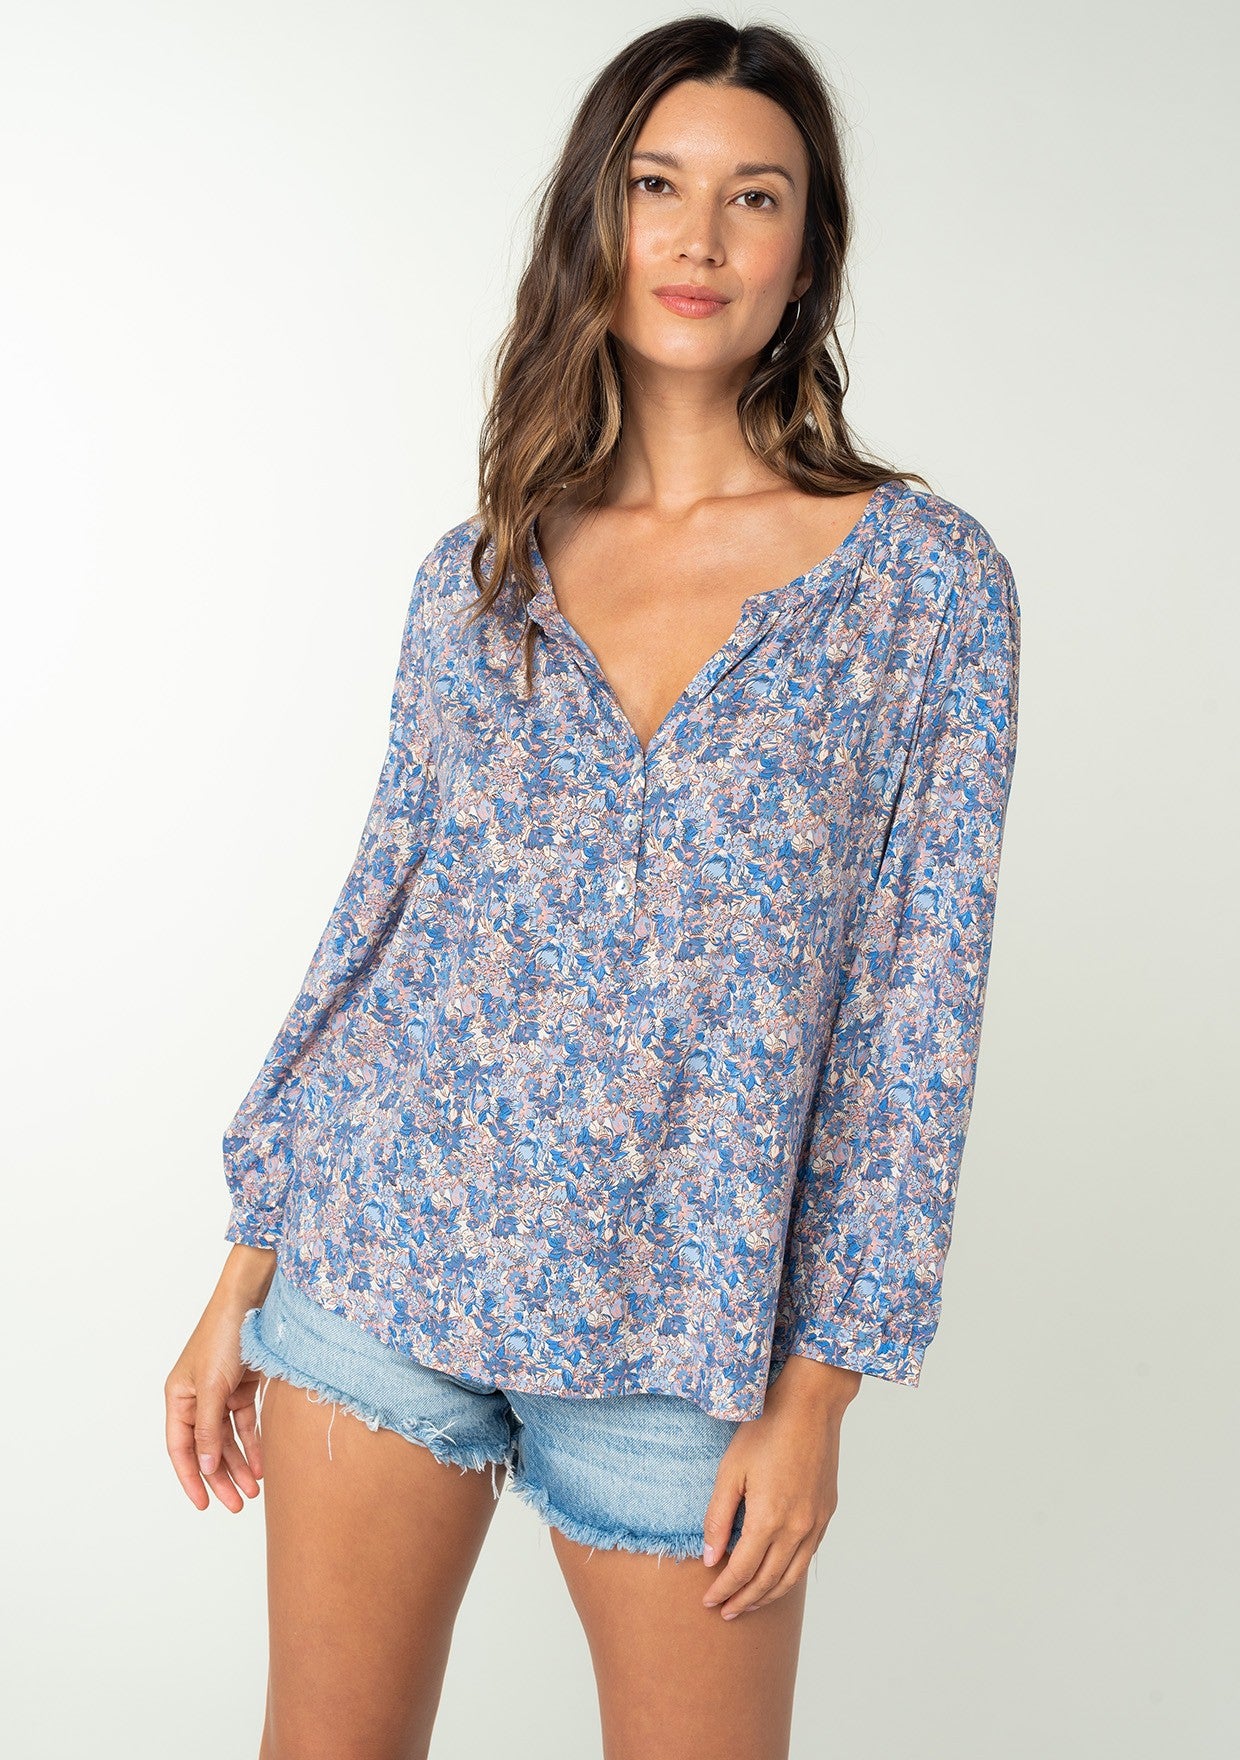 Blue Mulitfloral Blouse, 3/4 length sleeves, and a V-neck style